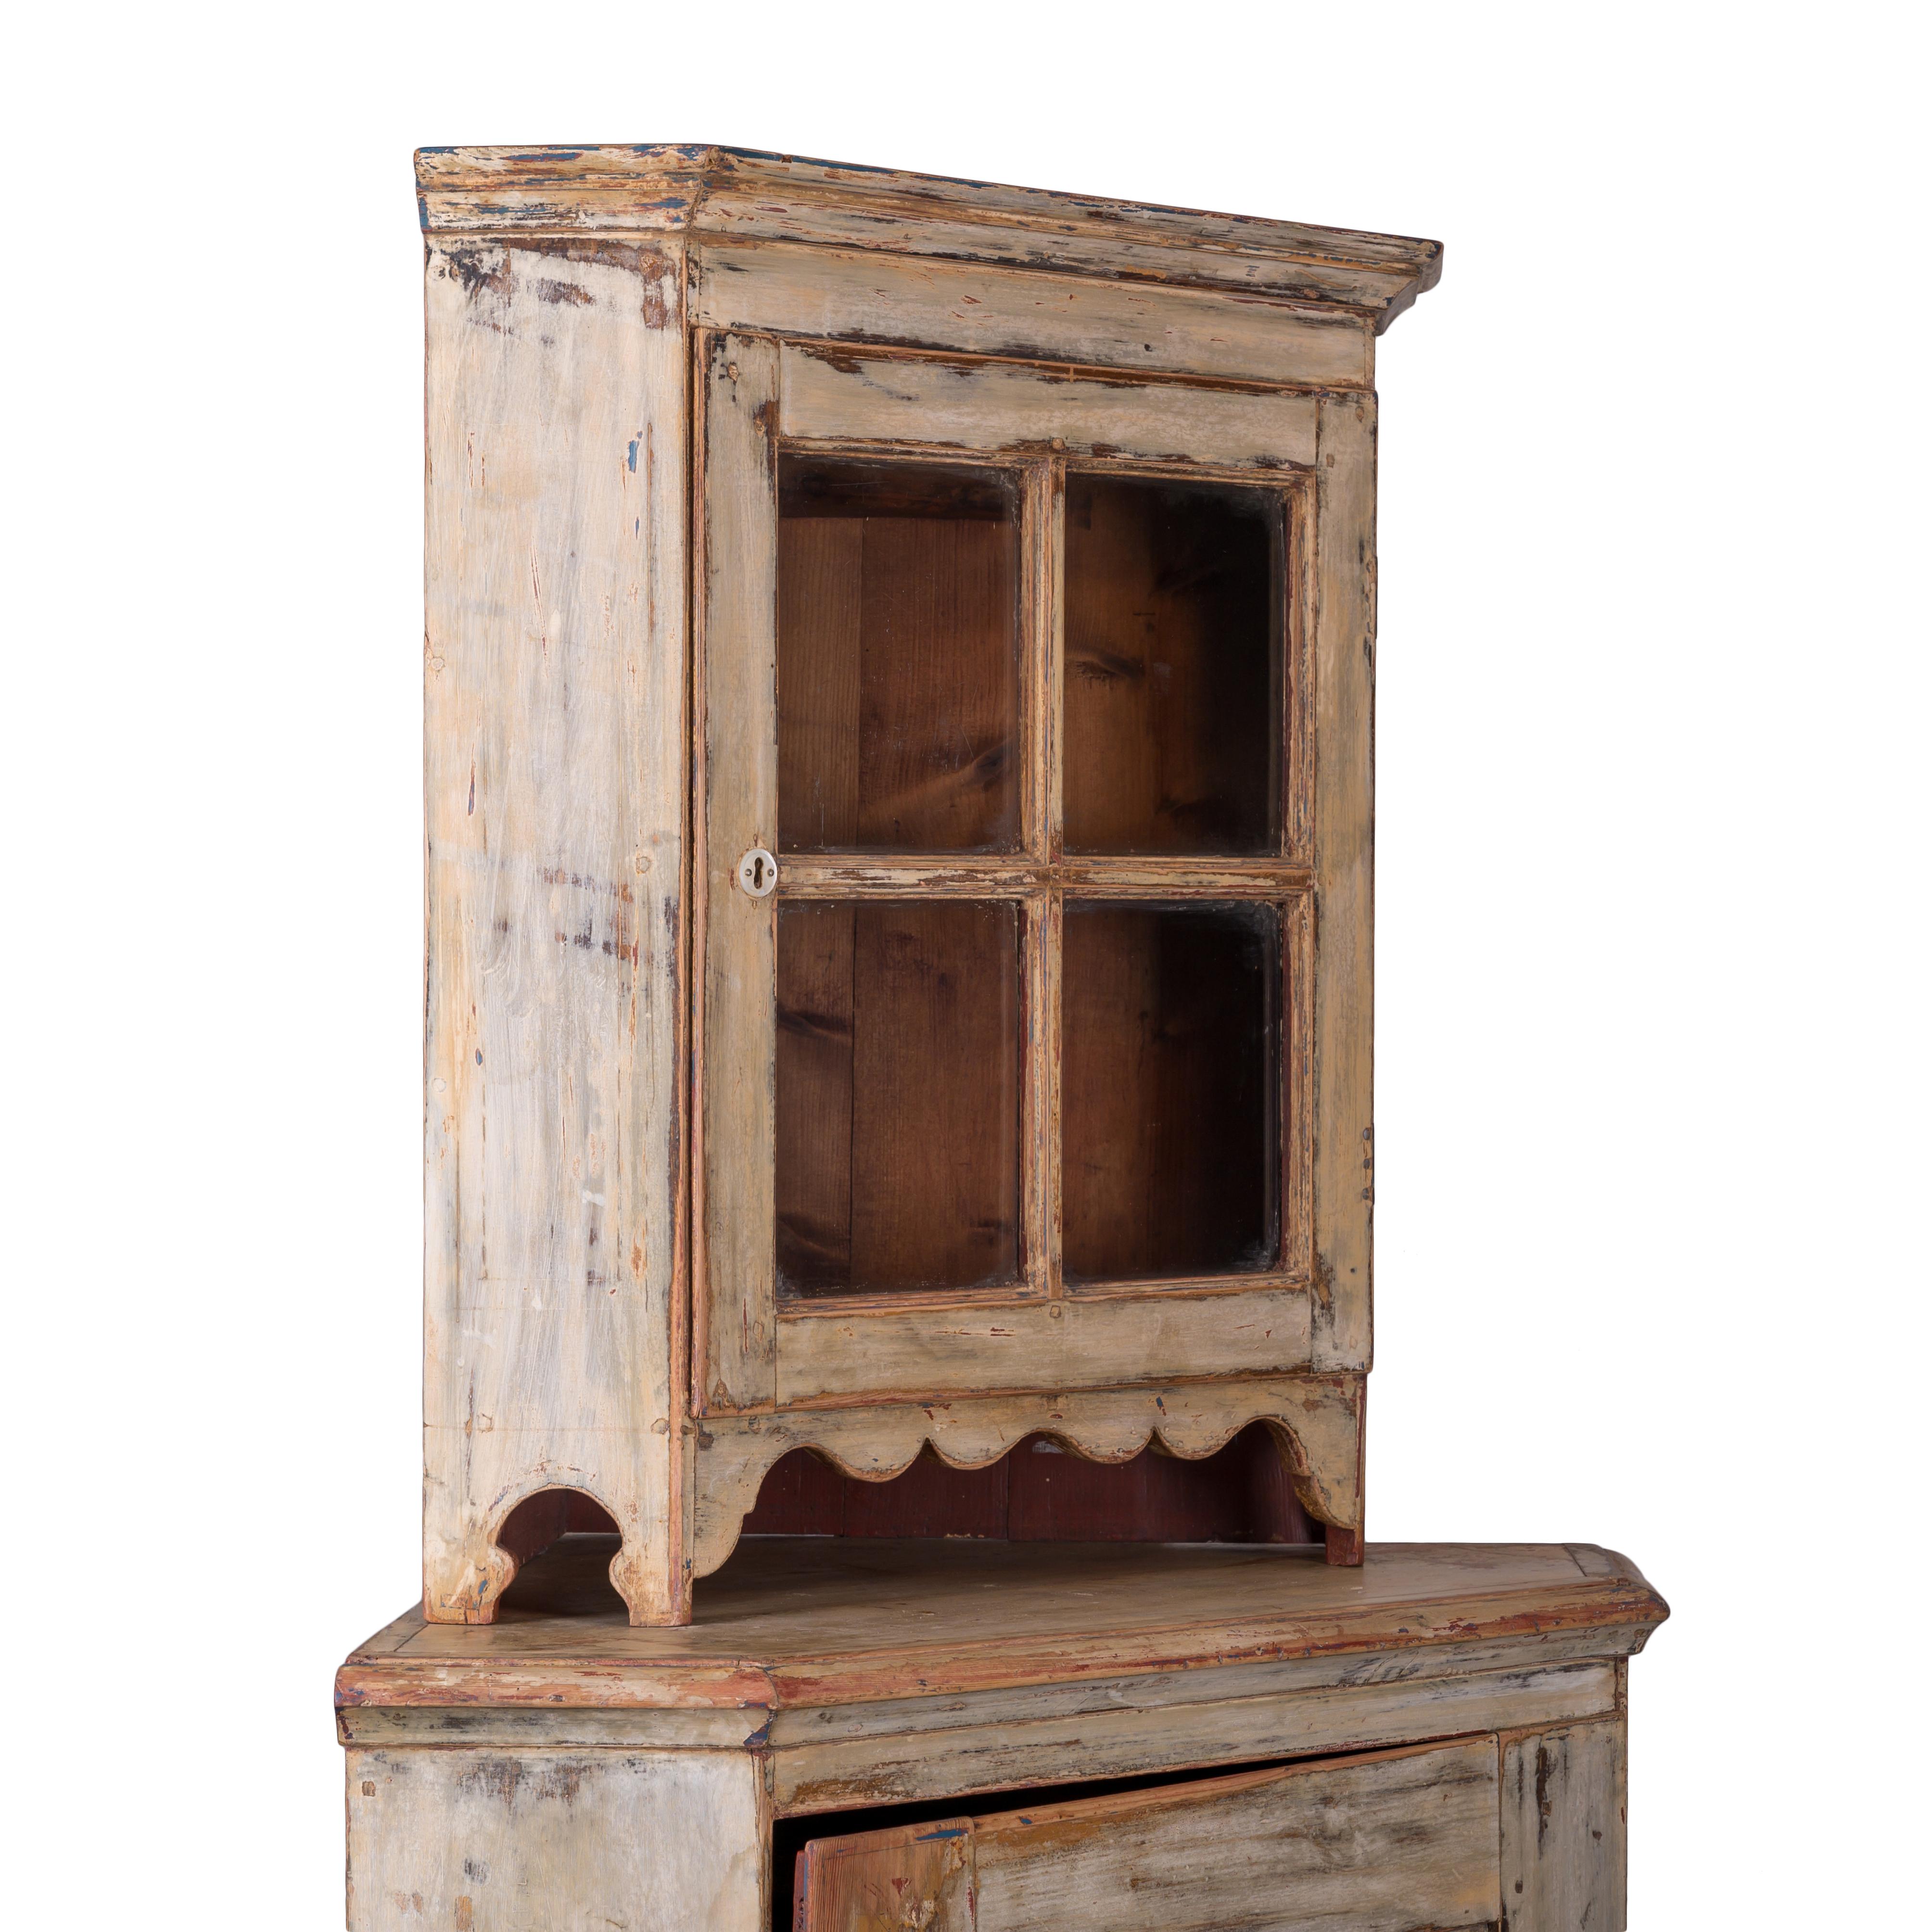 A Swedish baroque corner cupboard, mid-18th century.

Two pieces with smaller glazed upper cabinet and large lower cabinet.  Scraped back to cream white paint.

81 ½ inches tall by 29 ½ inches deep by 41 inches wide

Height of lower cabinet: 50 ½